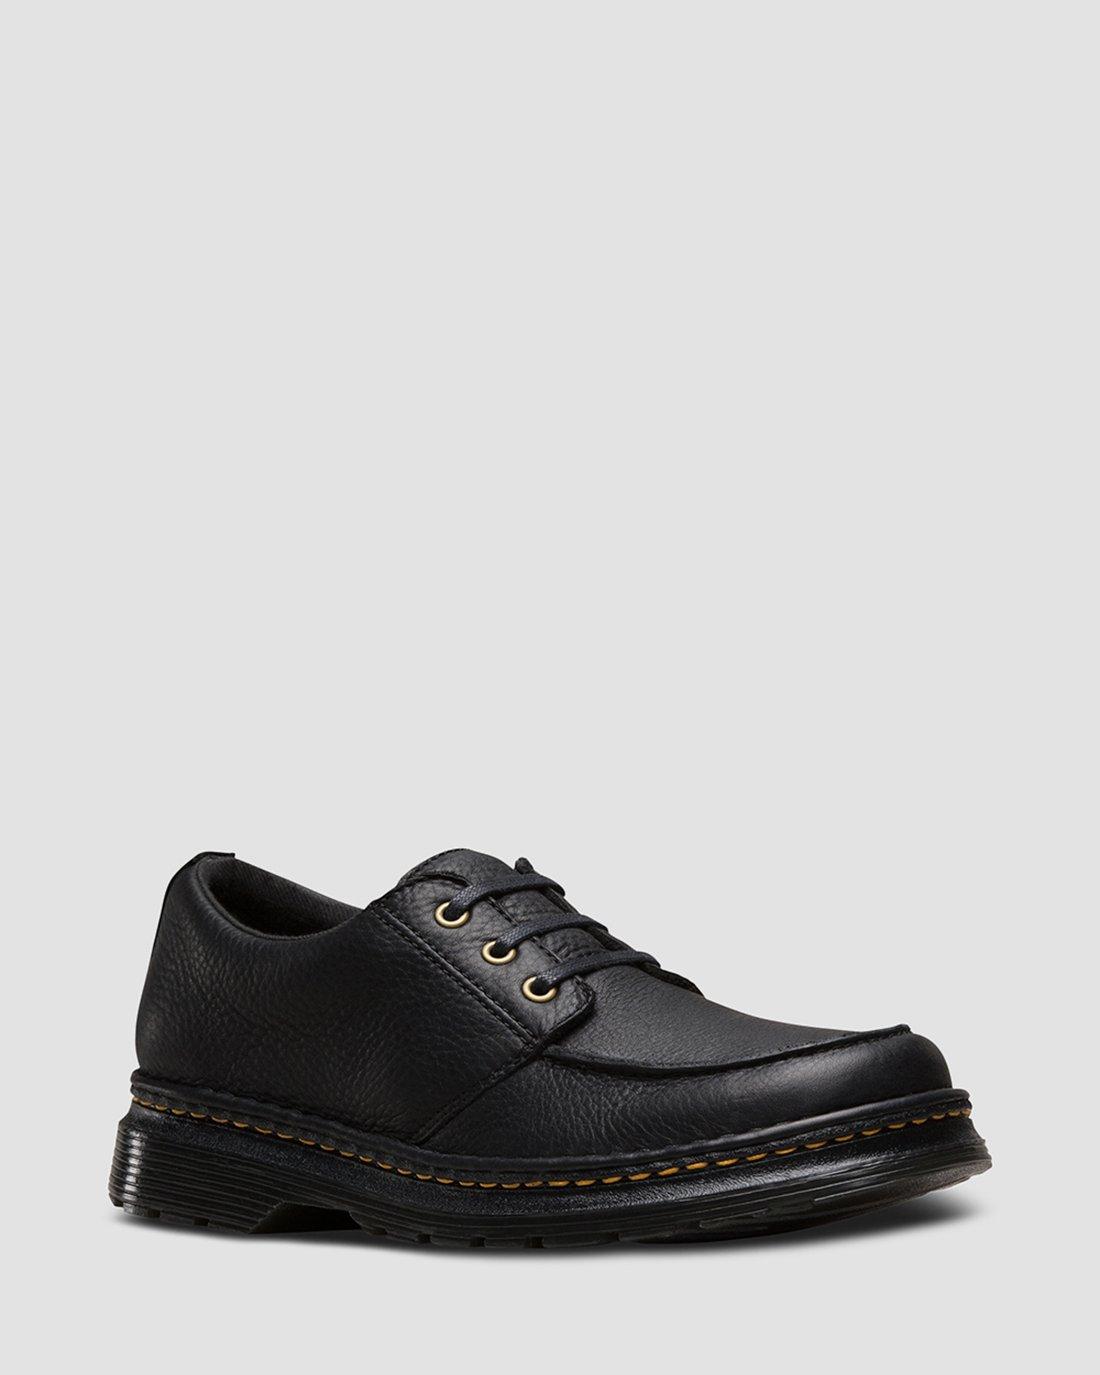 LUBBOCK GRIZZLY | Dr. Martens Official